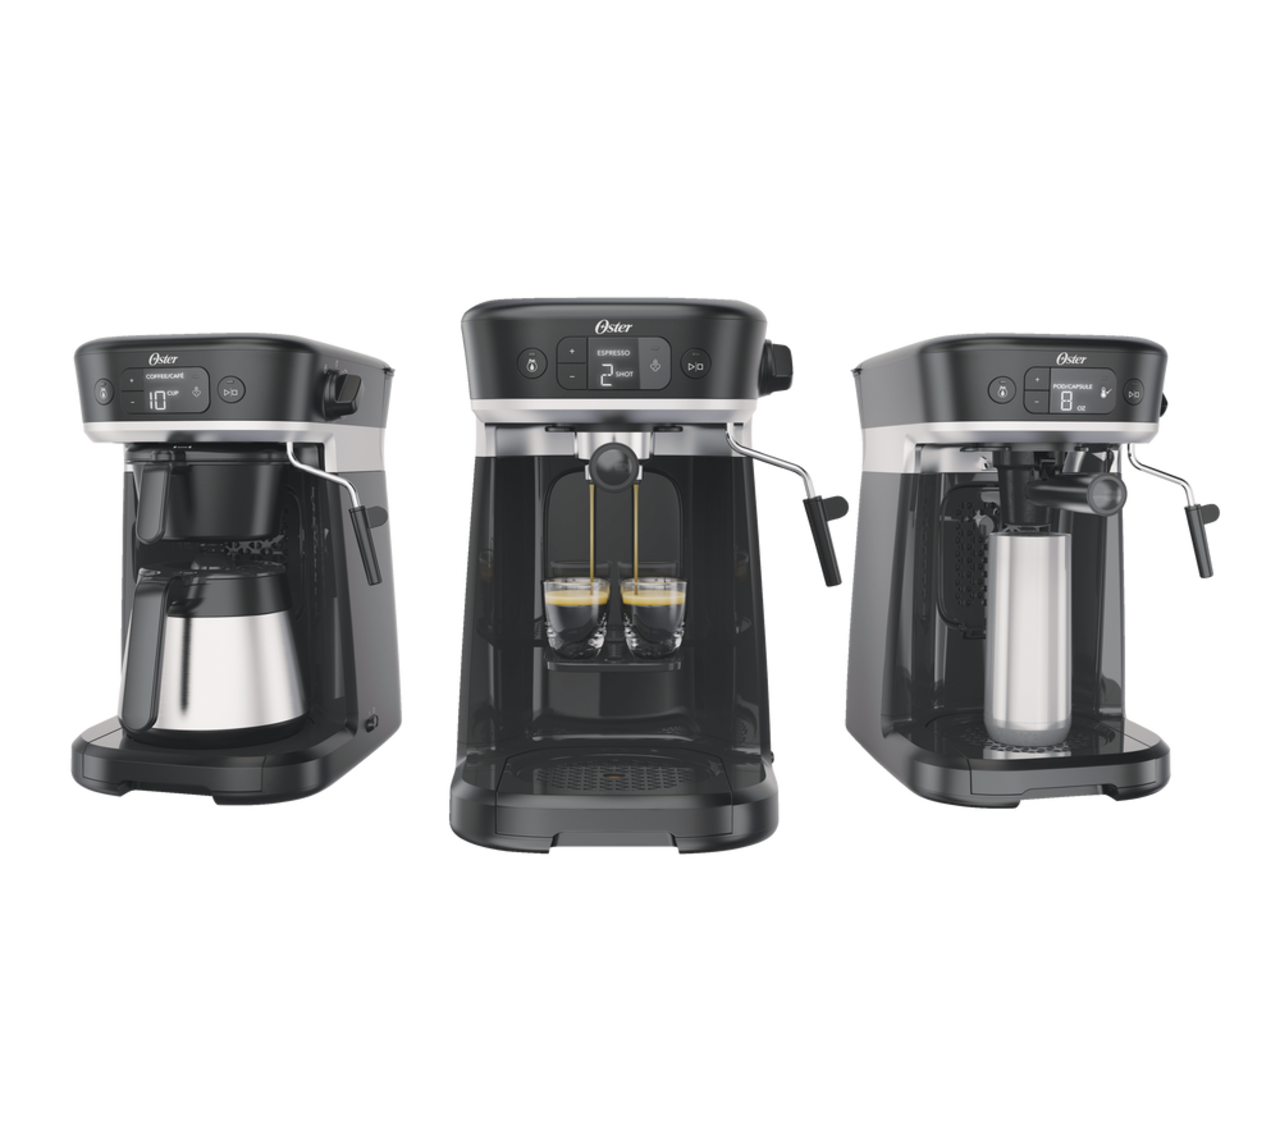 https://media-www.canadiantire.ca/product/living/kitchen/kitchen-appliances/0435182/oster-all-in-one-coffee-maker-02669bfb-15b4-4918-9227-357a7dcc8d7f.png?imdensity=1&imwidth=1244&impolicy=mZoom